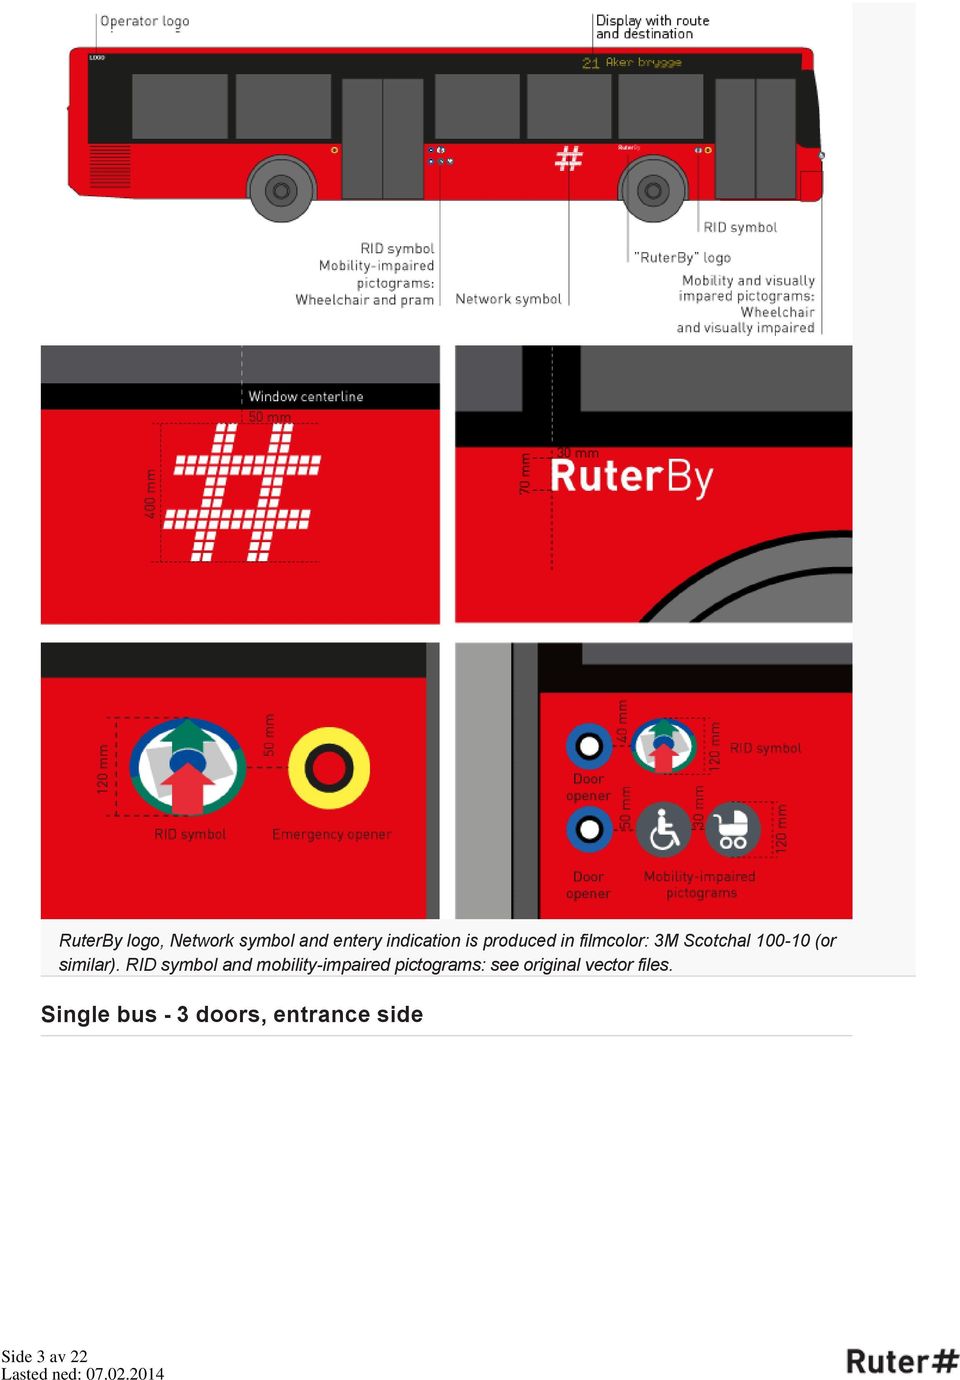 RID symbol and mobility impaired pictograms: see